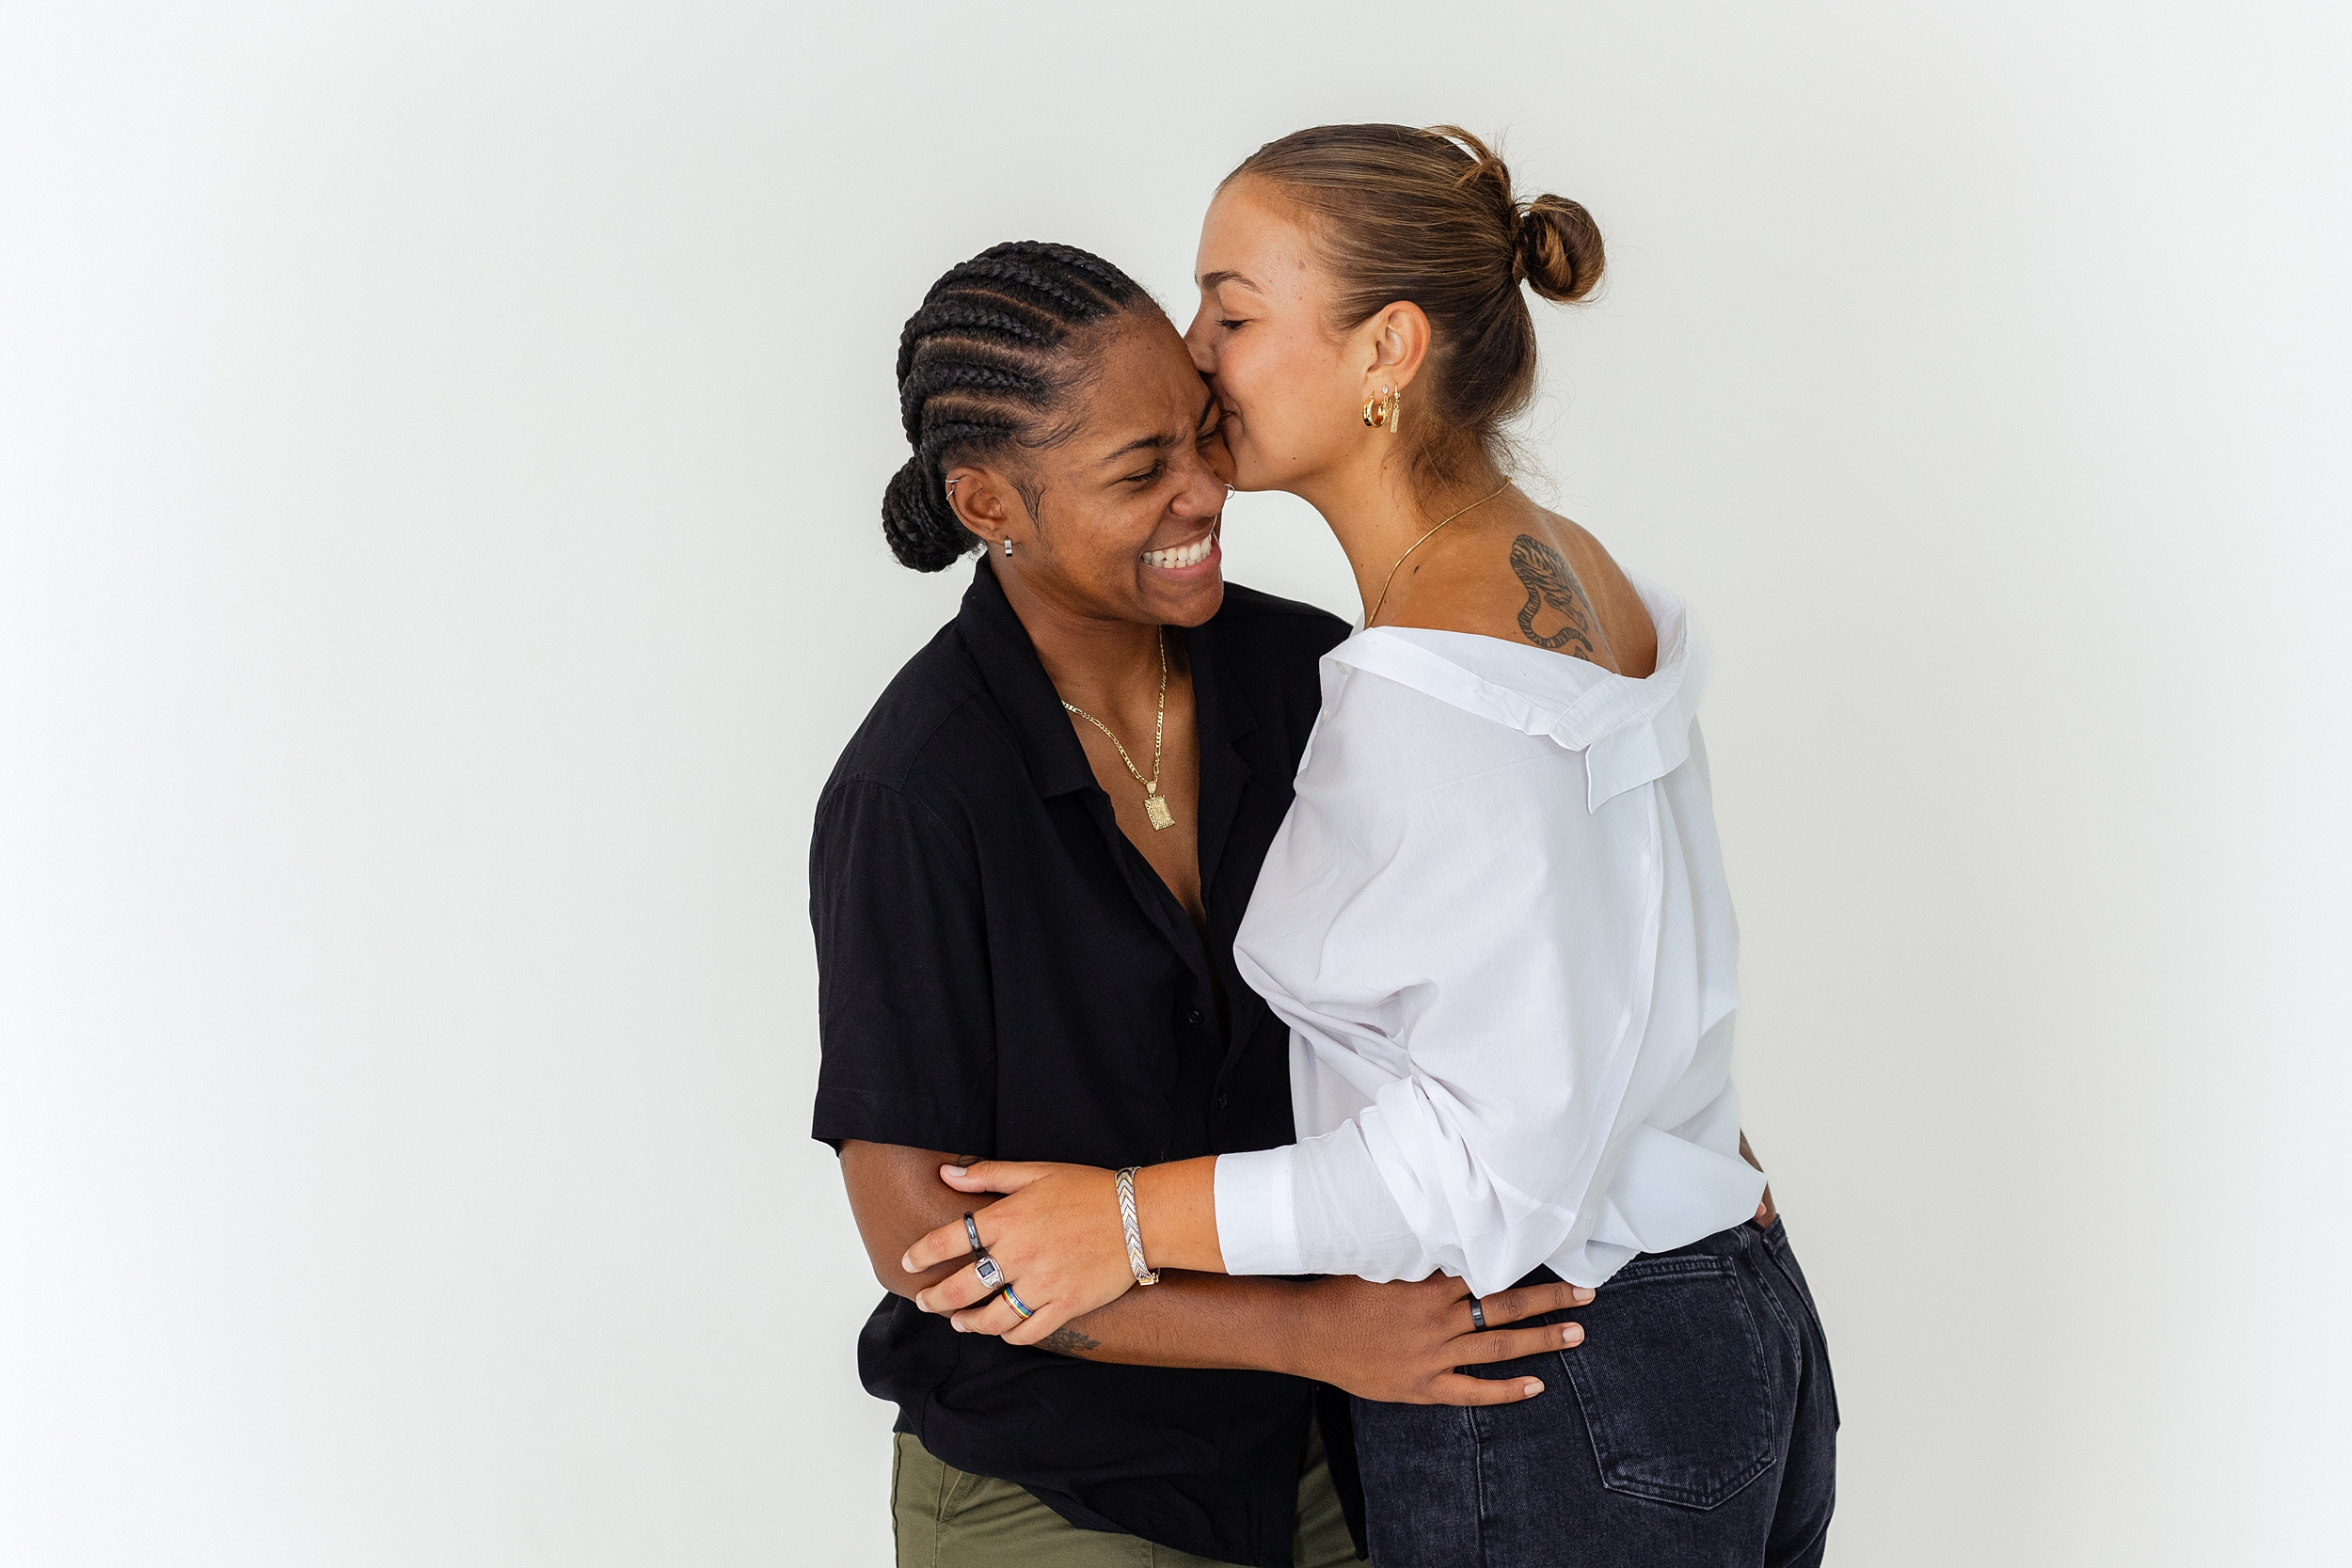 couple laughs against white background during studio session